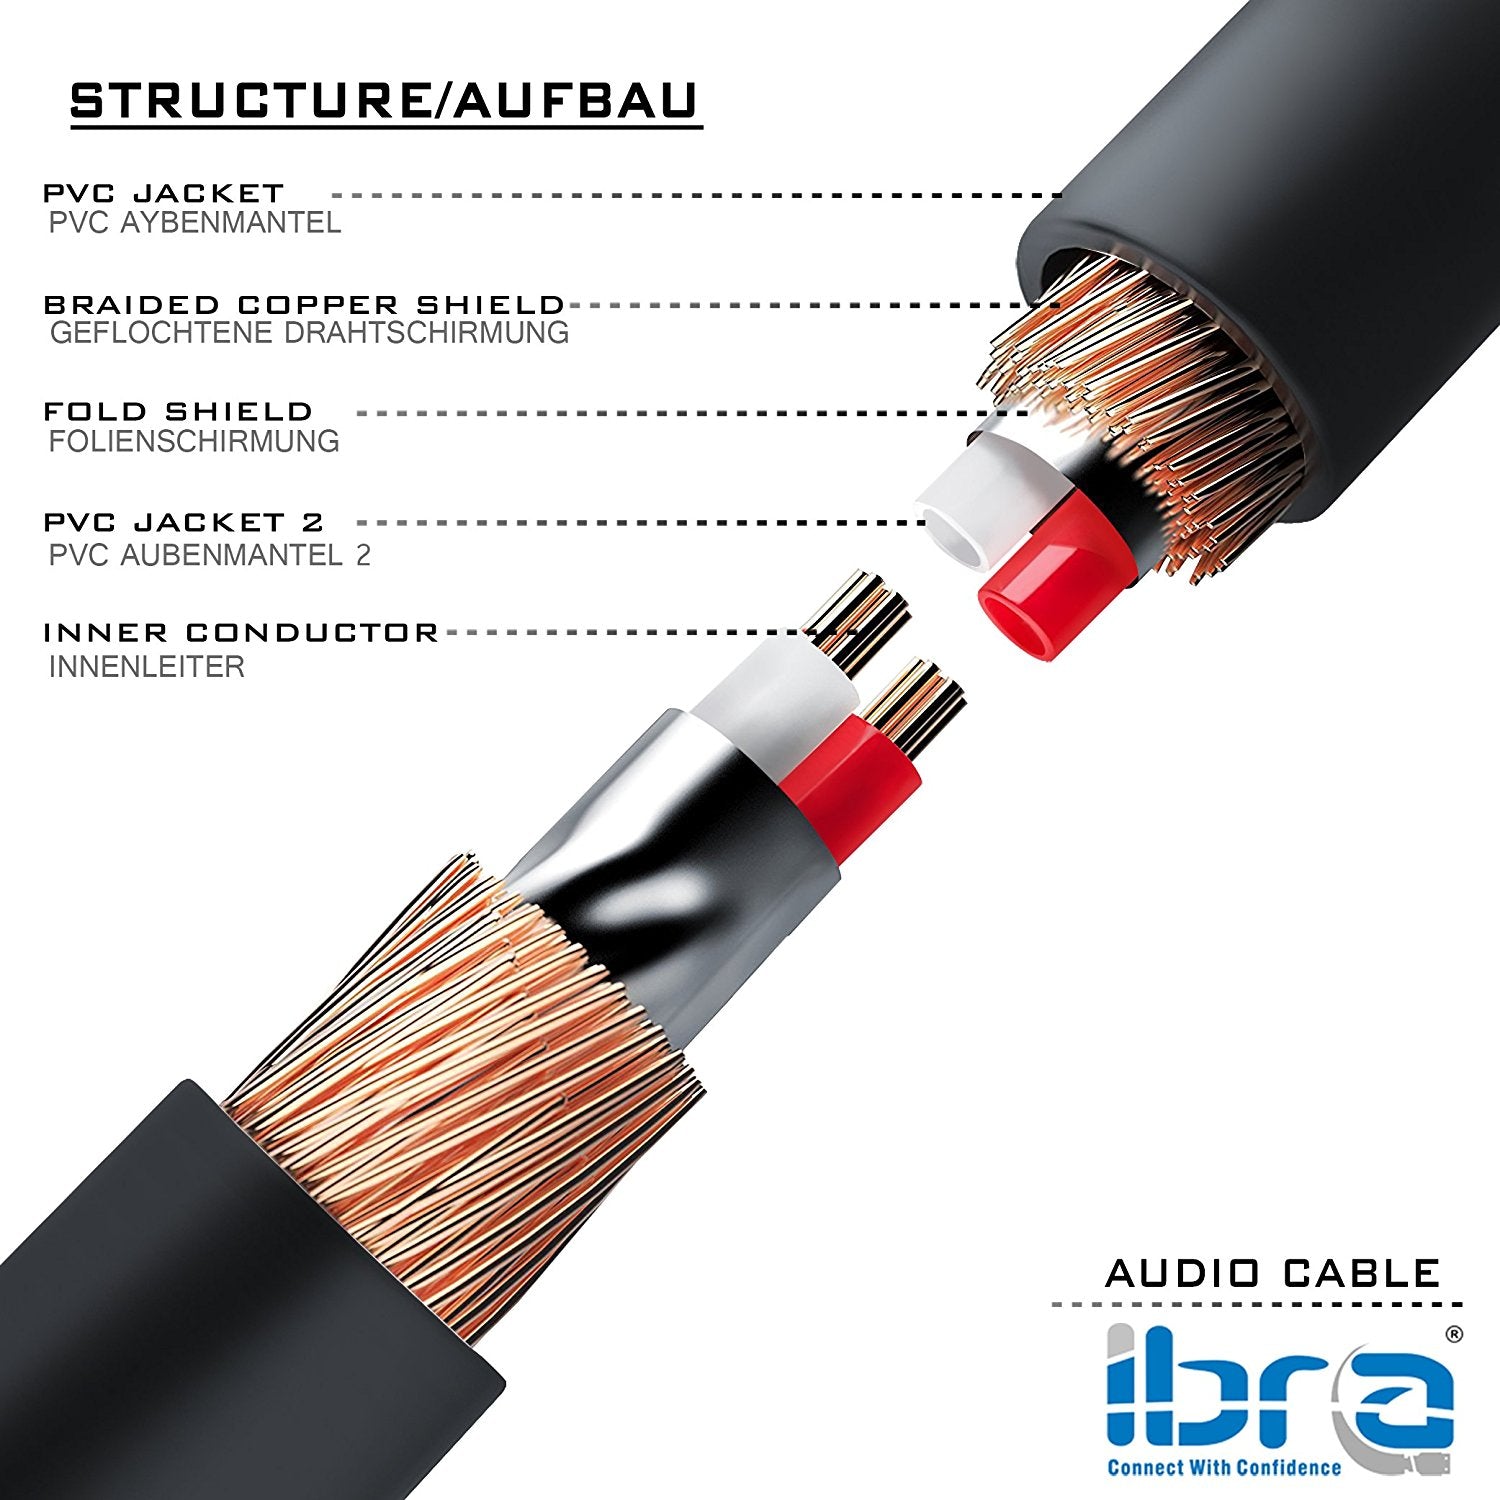 Aux Cable 3M 3.5mm Stereo Pro Auxiliary Audio Cable - for Beats Headphones Apple iPod iPhone iPad Samsung LG Smartphone MP3 Player Home / Car etc - IBRA Black